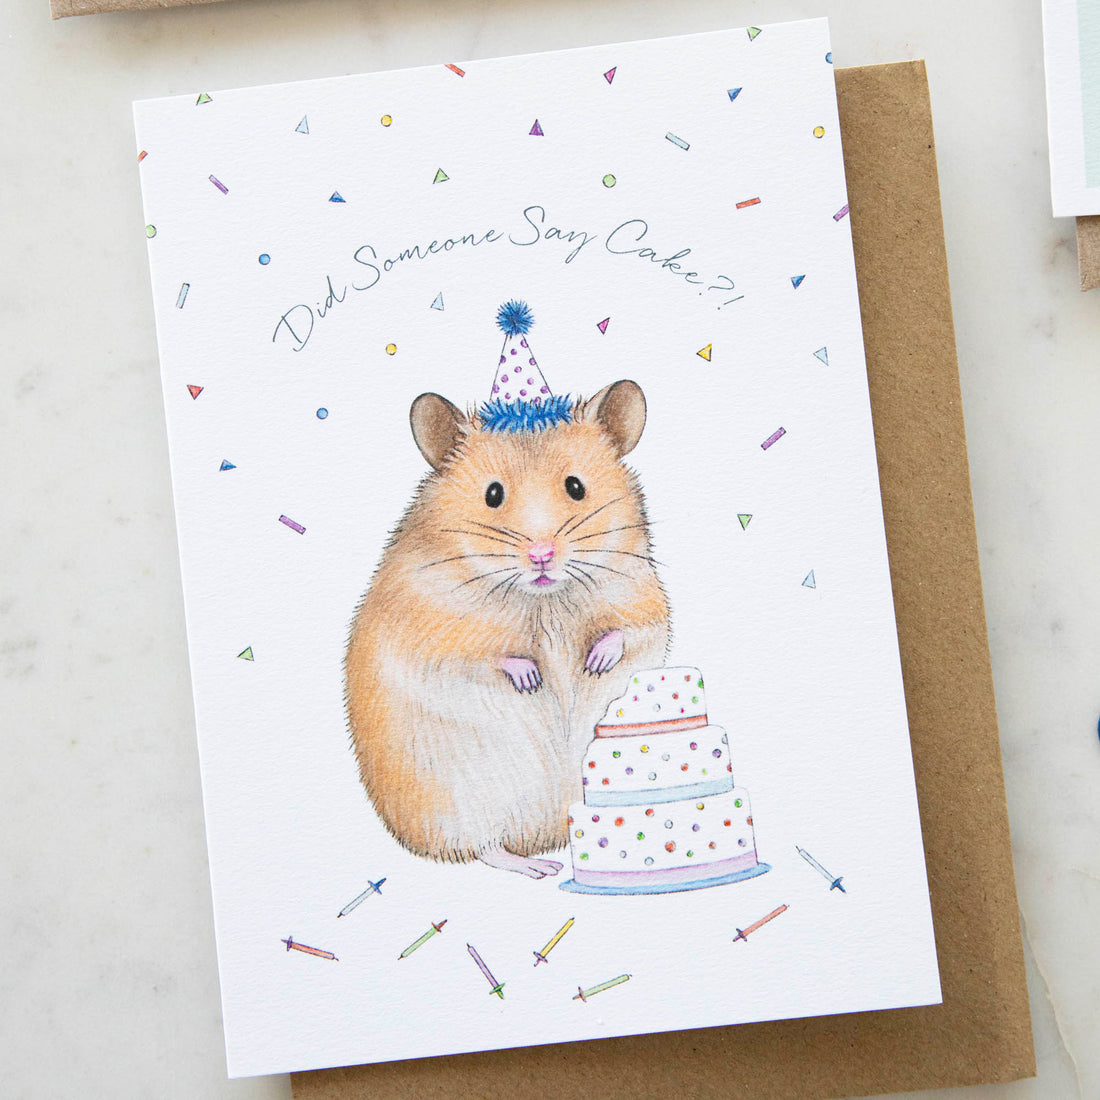 Celebrate with a Lottie Murphy Hamster &amp; Cake Birthday Card featuring an adorable furry friend holding a delicious cake. Share your heartfelt birthday wishes with this charming cake card.